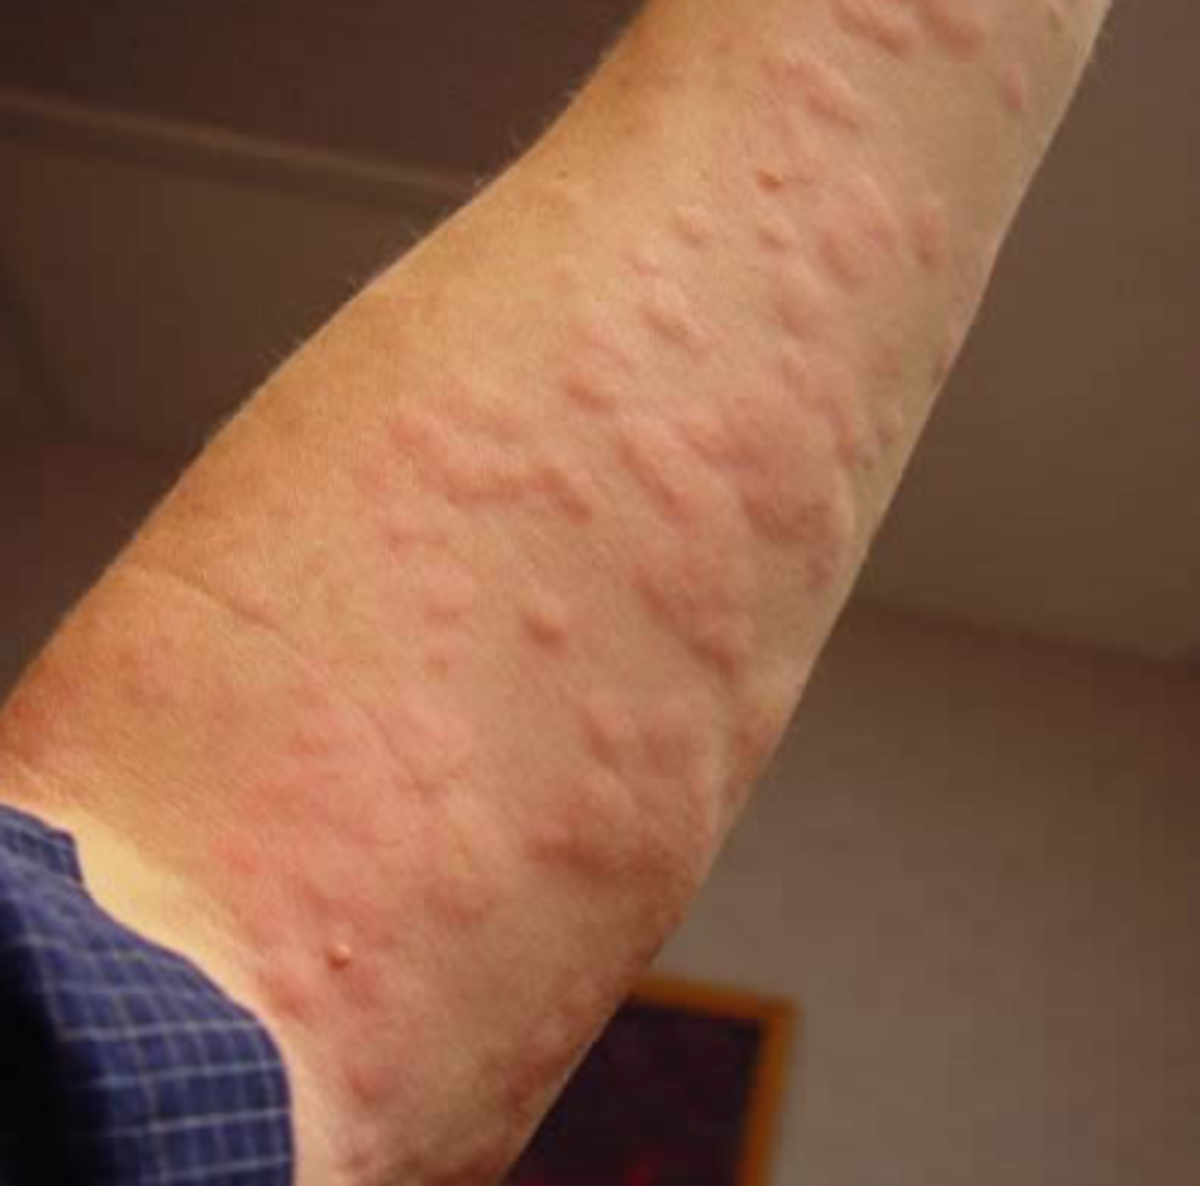 Relief From Hives (Urticaria) and Eczema Rashes In Under One Minute, Naturally